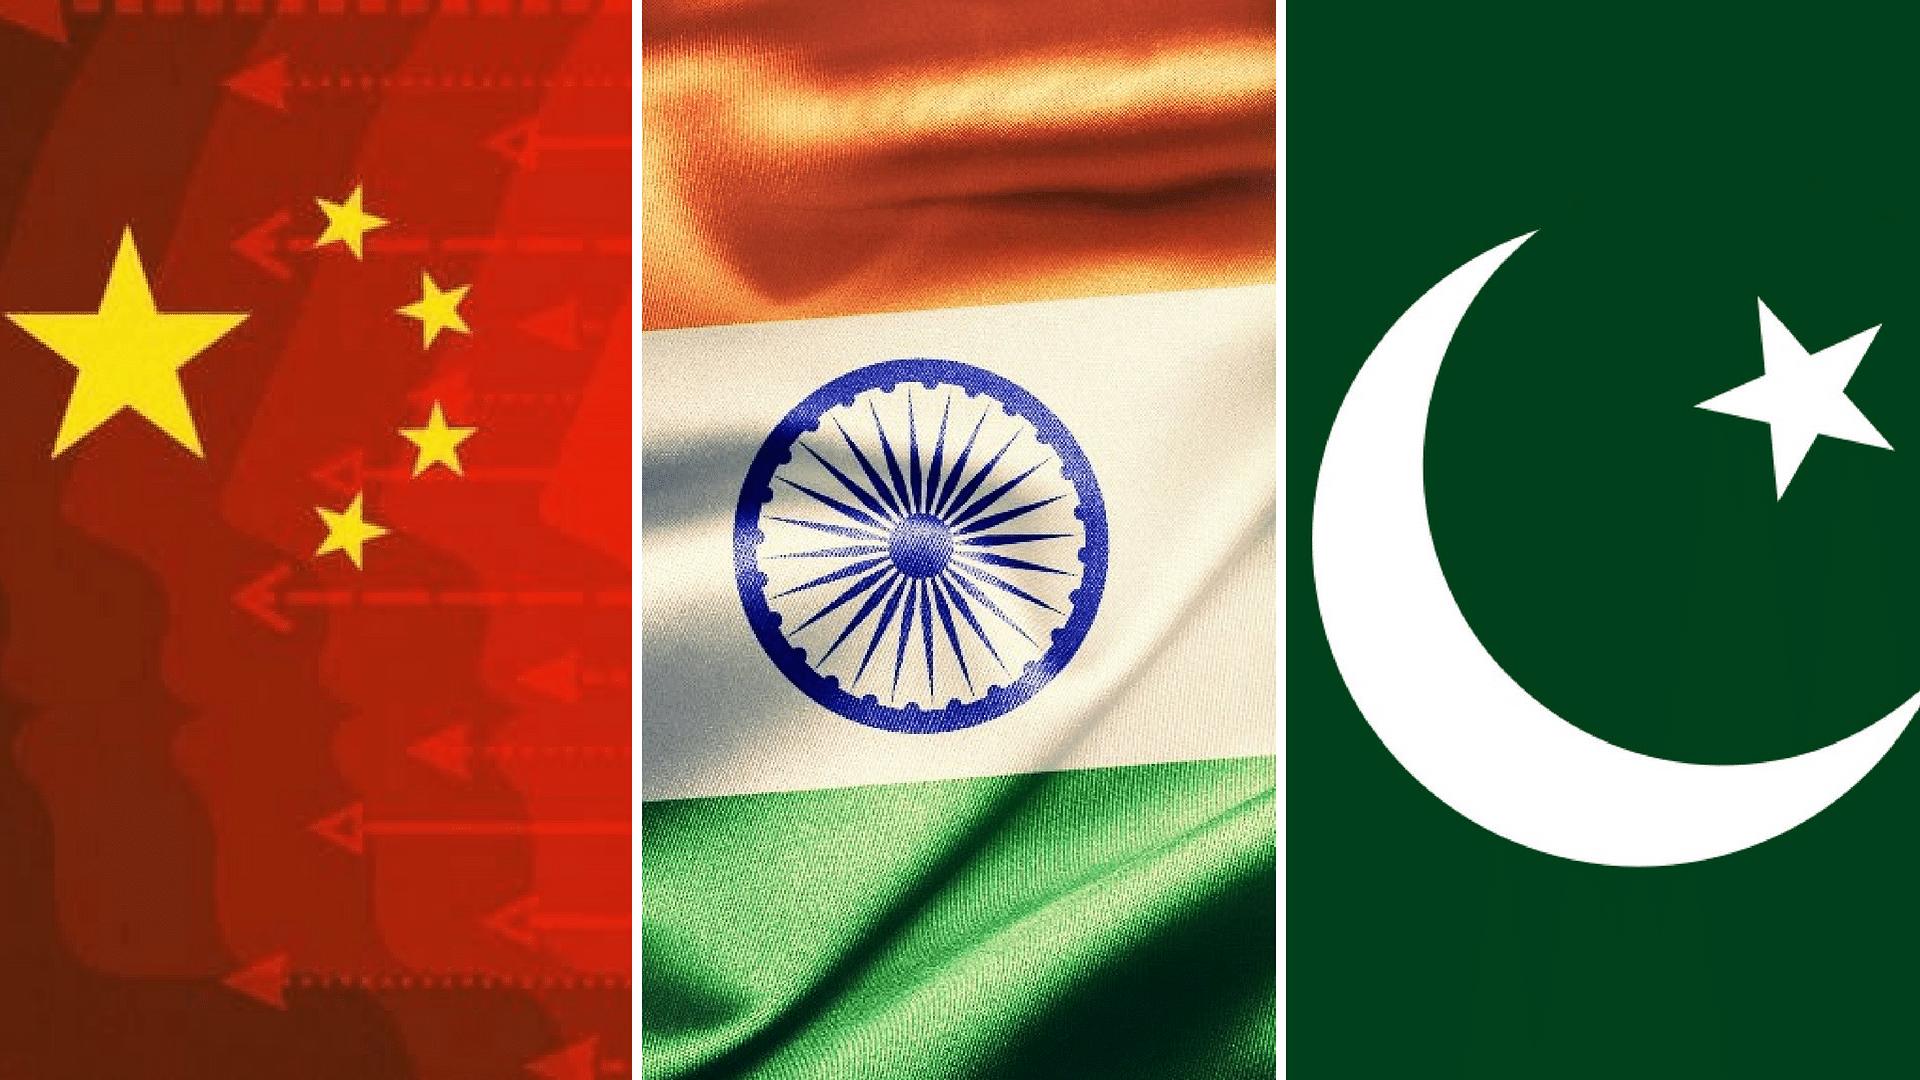 Luo Zhaohui, Chinese Ambassador to India, had suggested that a trilateral summit be held between India, China and Pakistan.